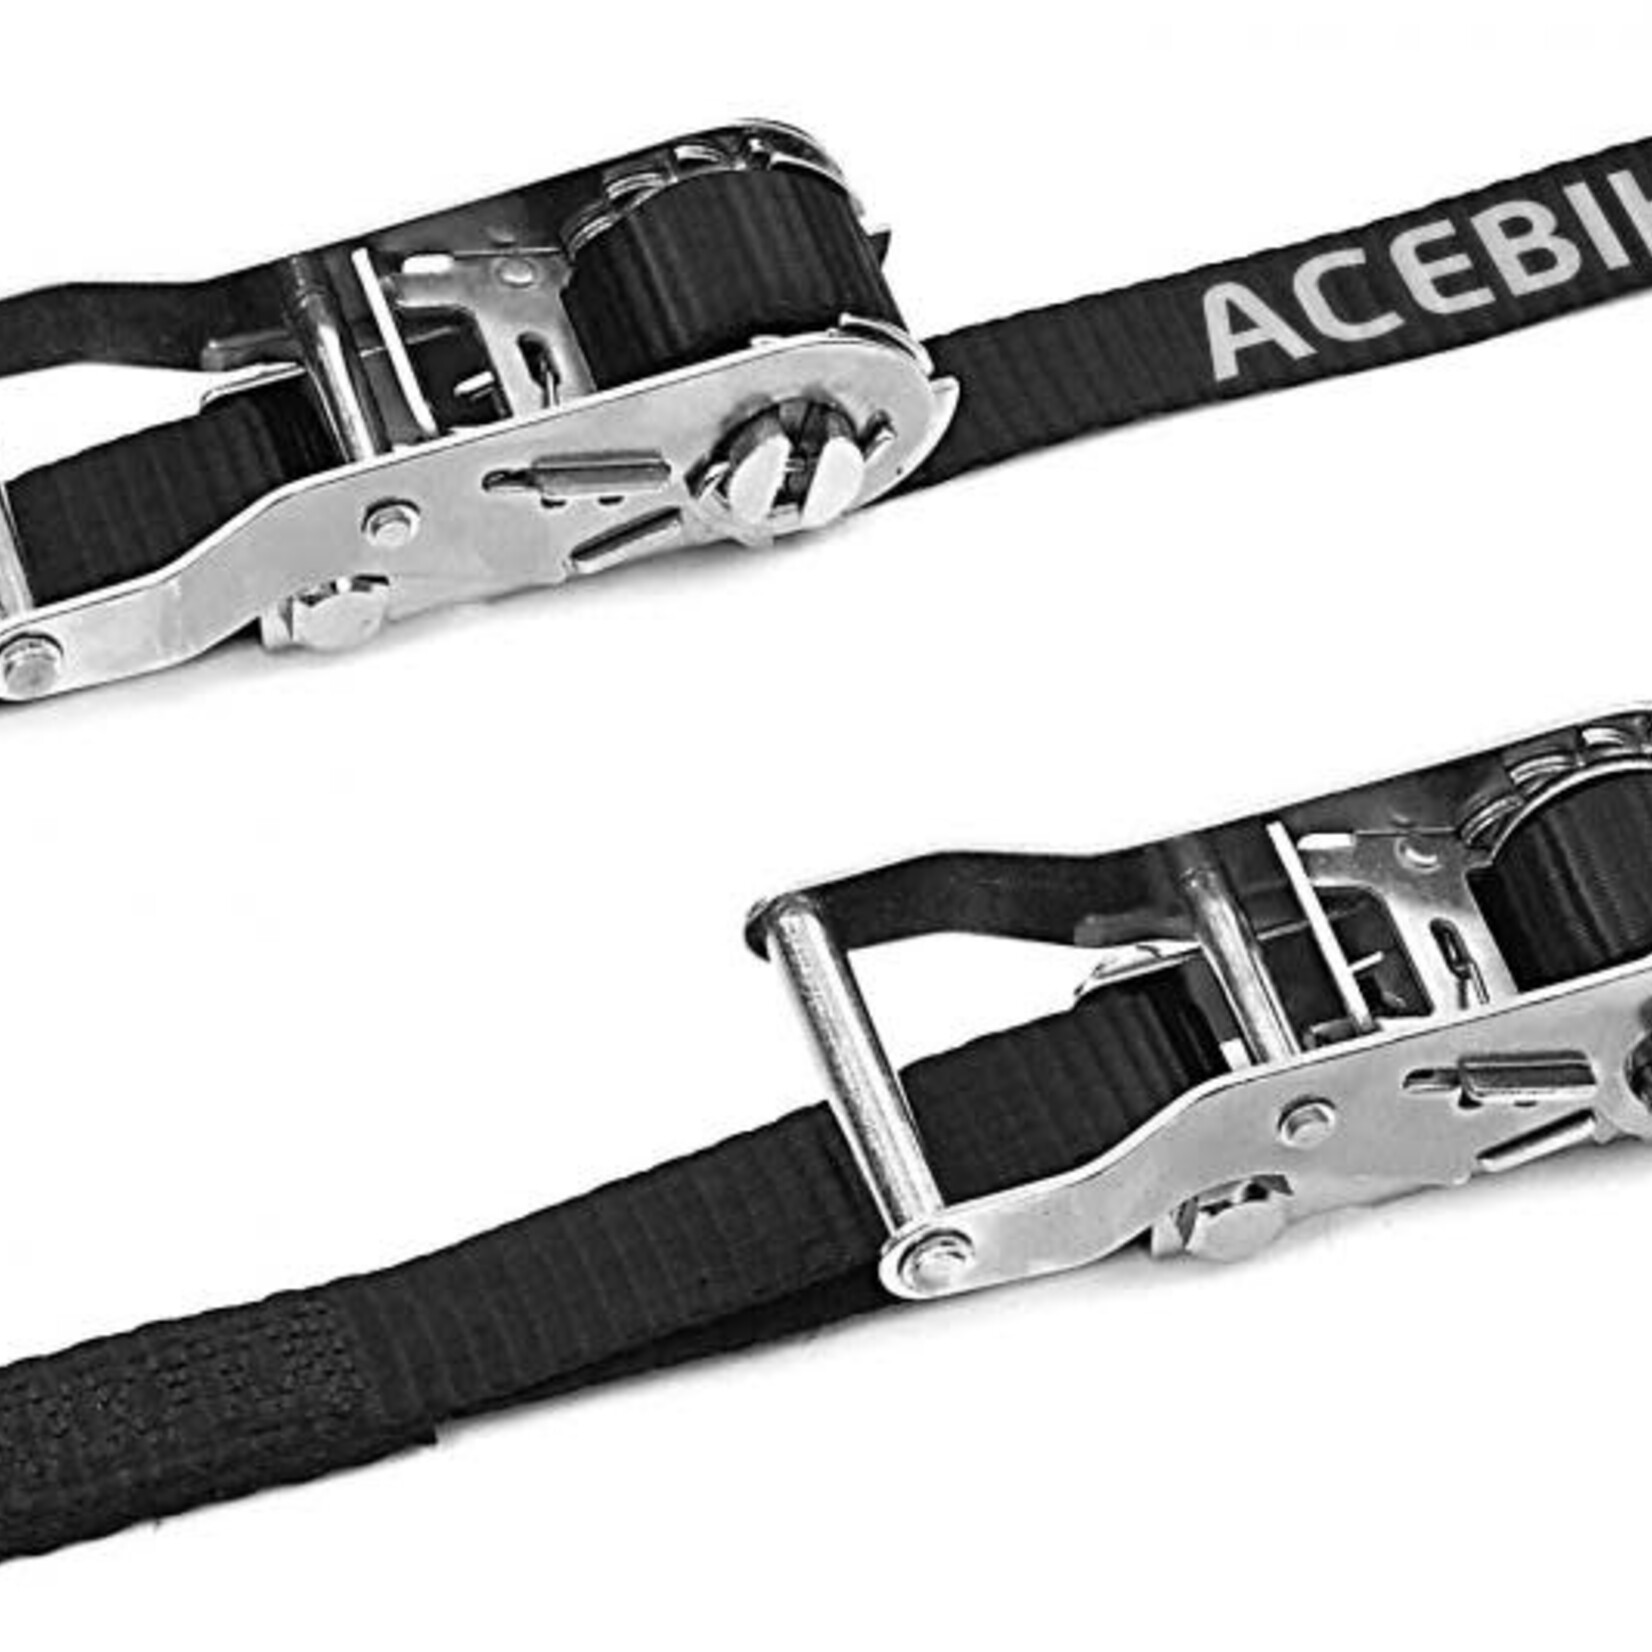 Acebikes Acebikes tie down with ratchet heavy duty